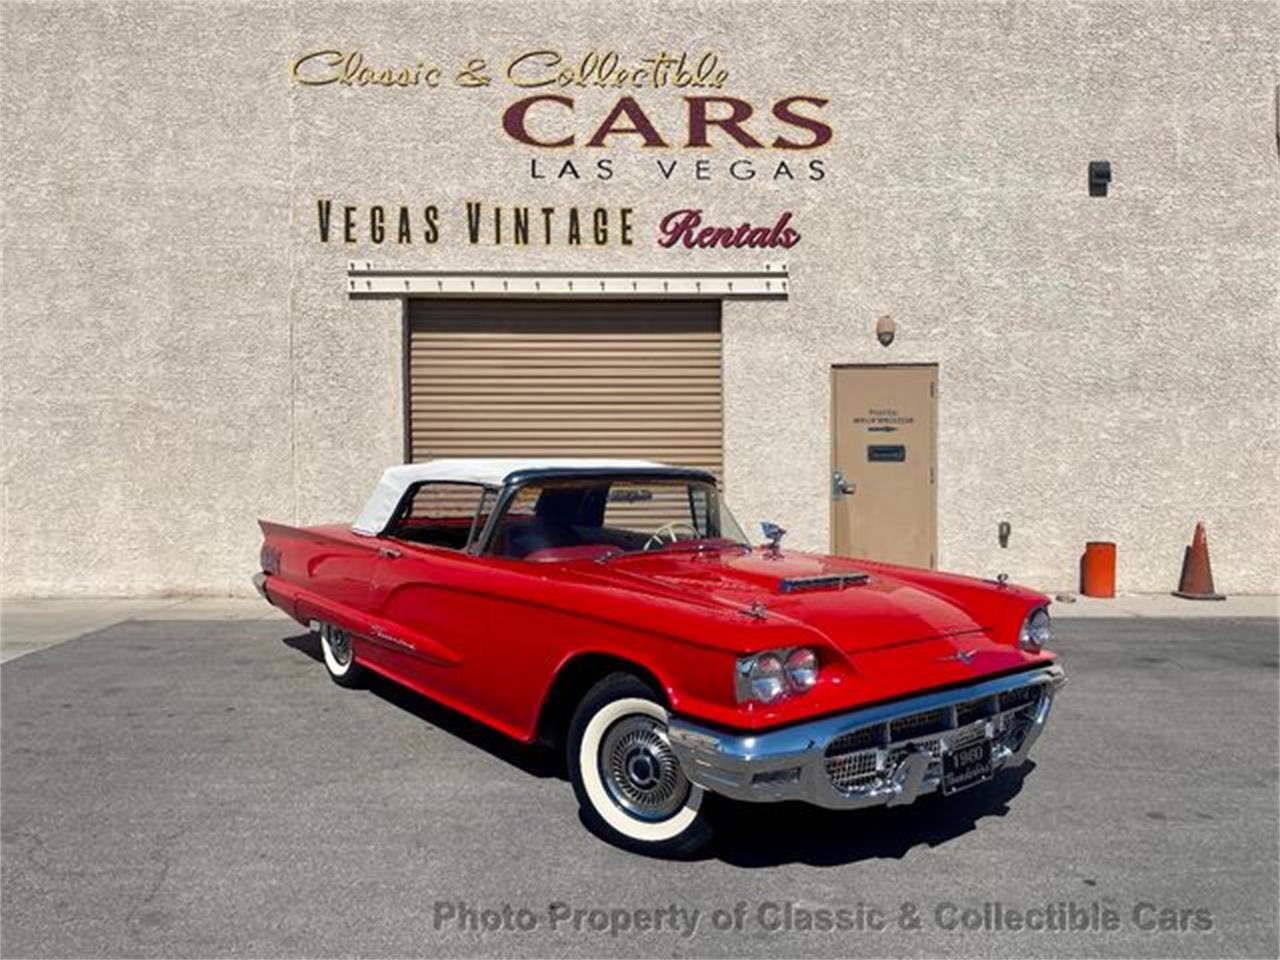 For Sale: 1960 Ford Thunderbird in Las Vegas, Nevada for sale in Las Vegas, NV